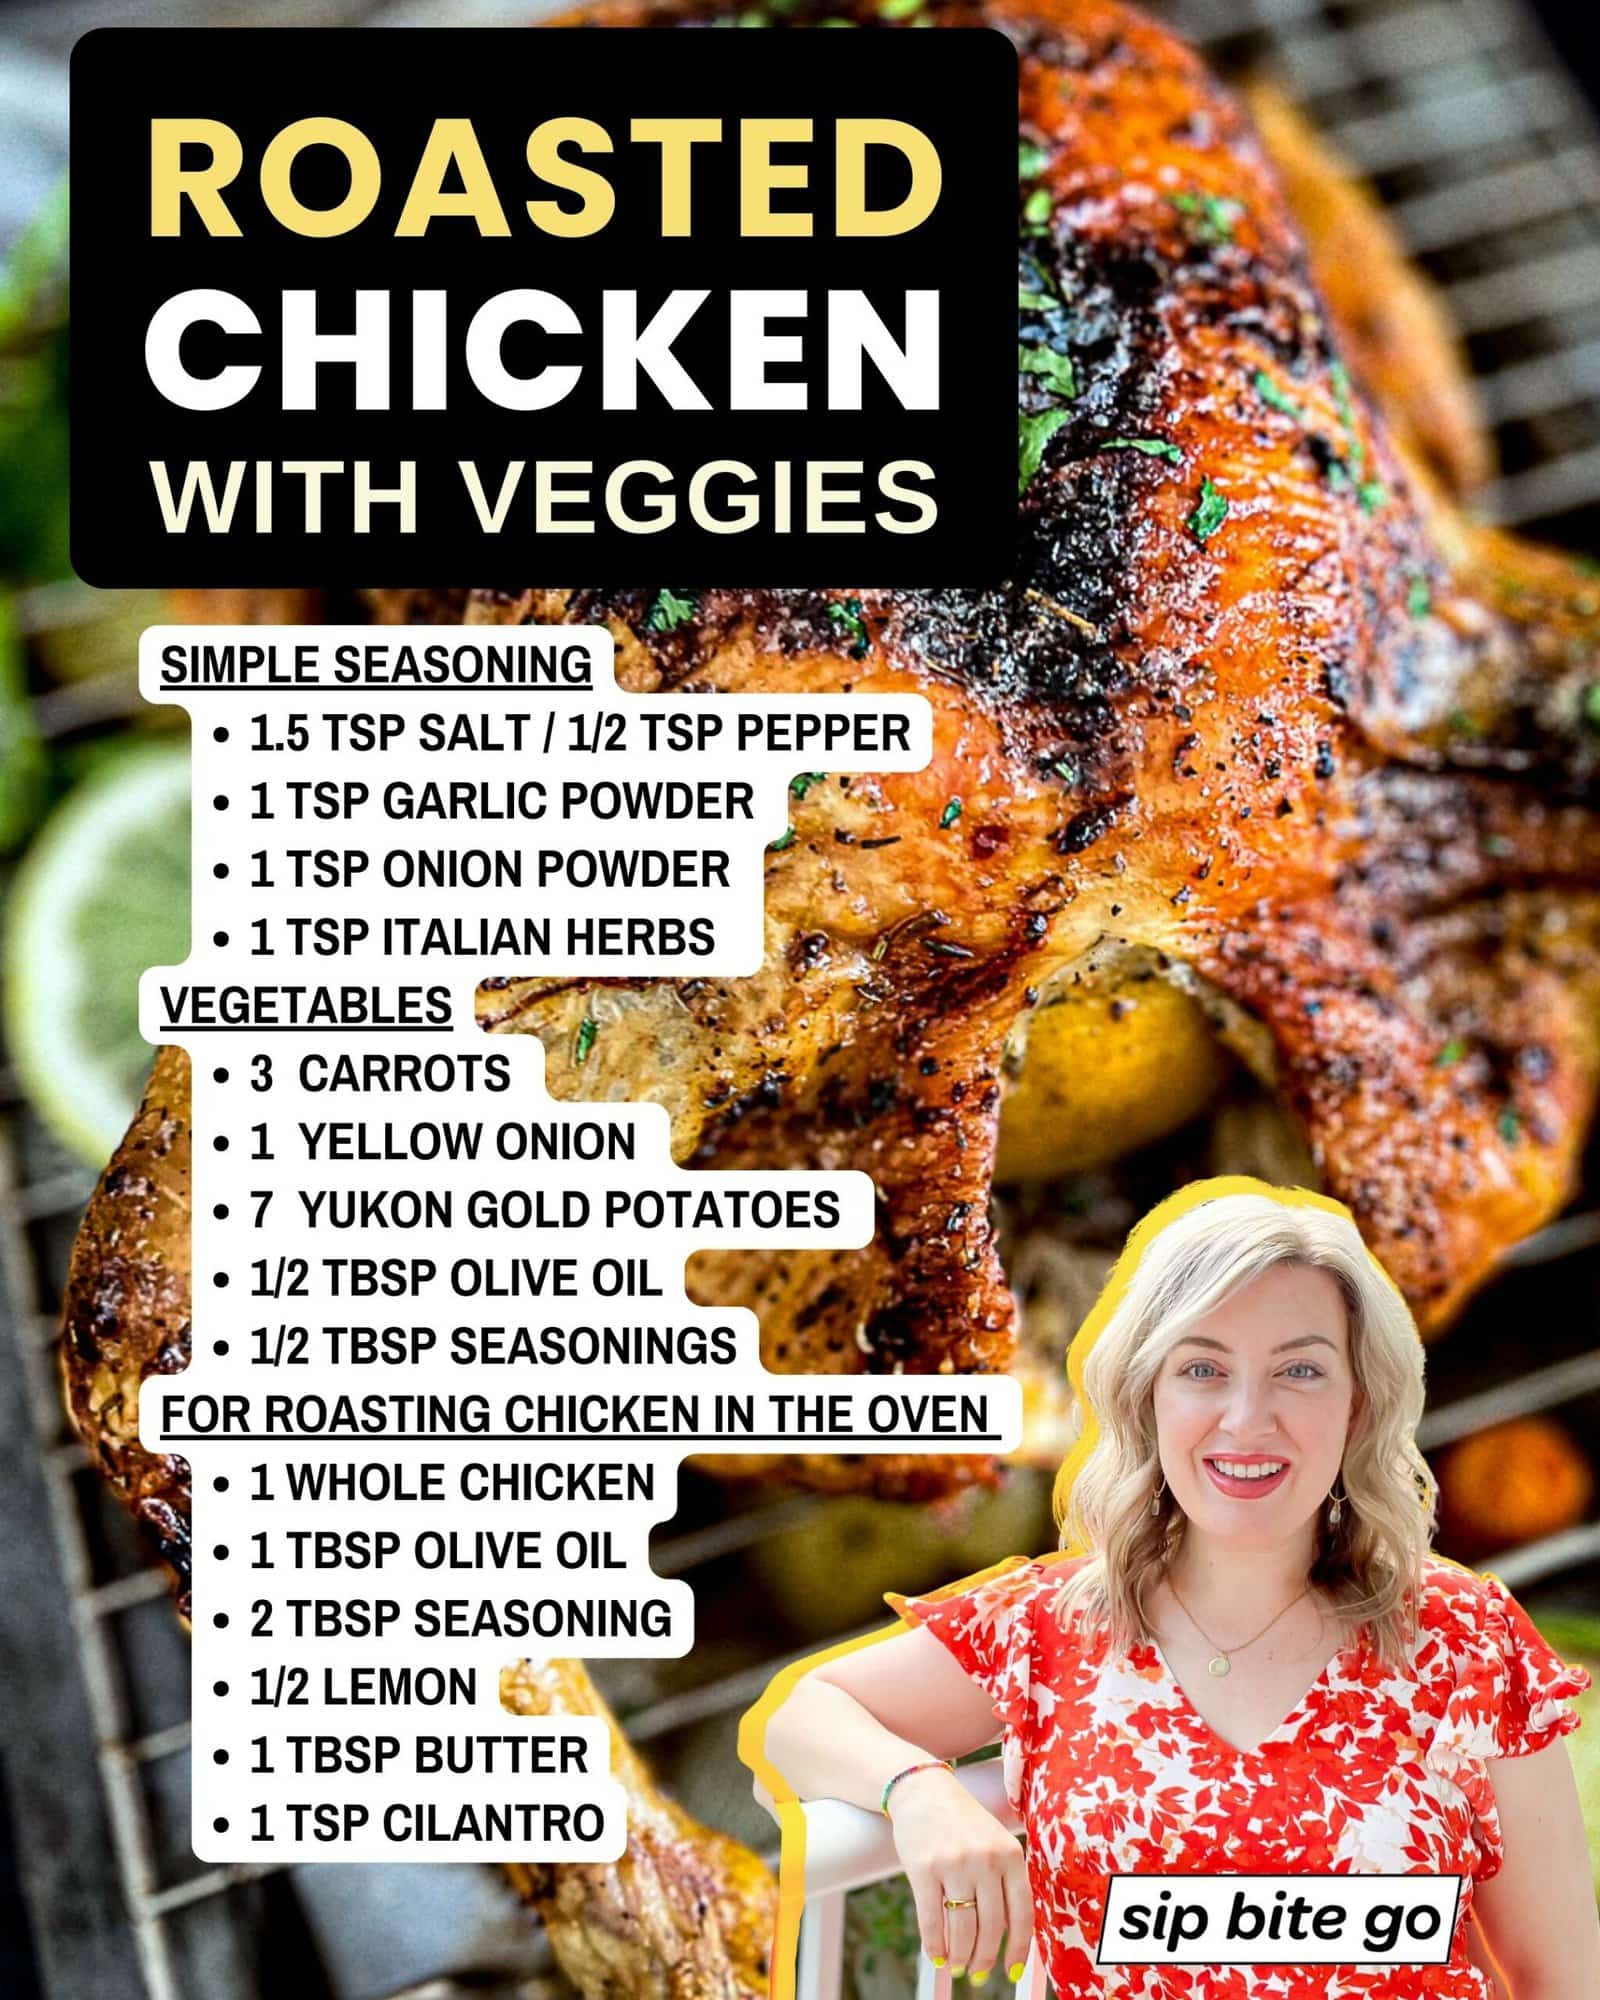 Ingredients list to roast chicken with vegetables with Jenna Passaro food blogger and logo